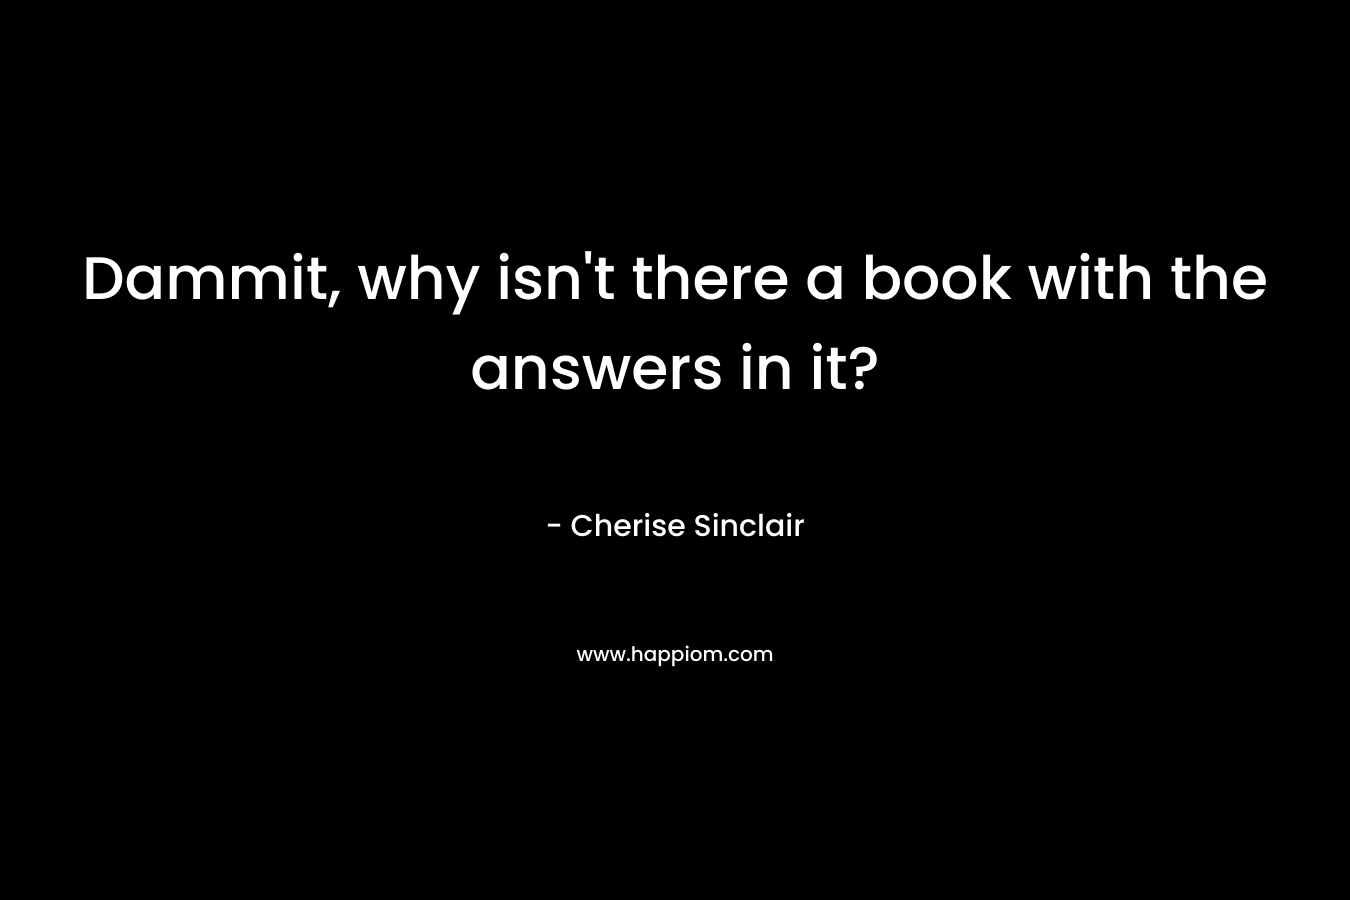 Dammit, why isn’t there a book with the answers in it? – Cherise Sinclair